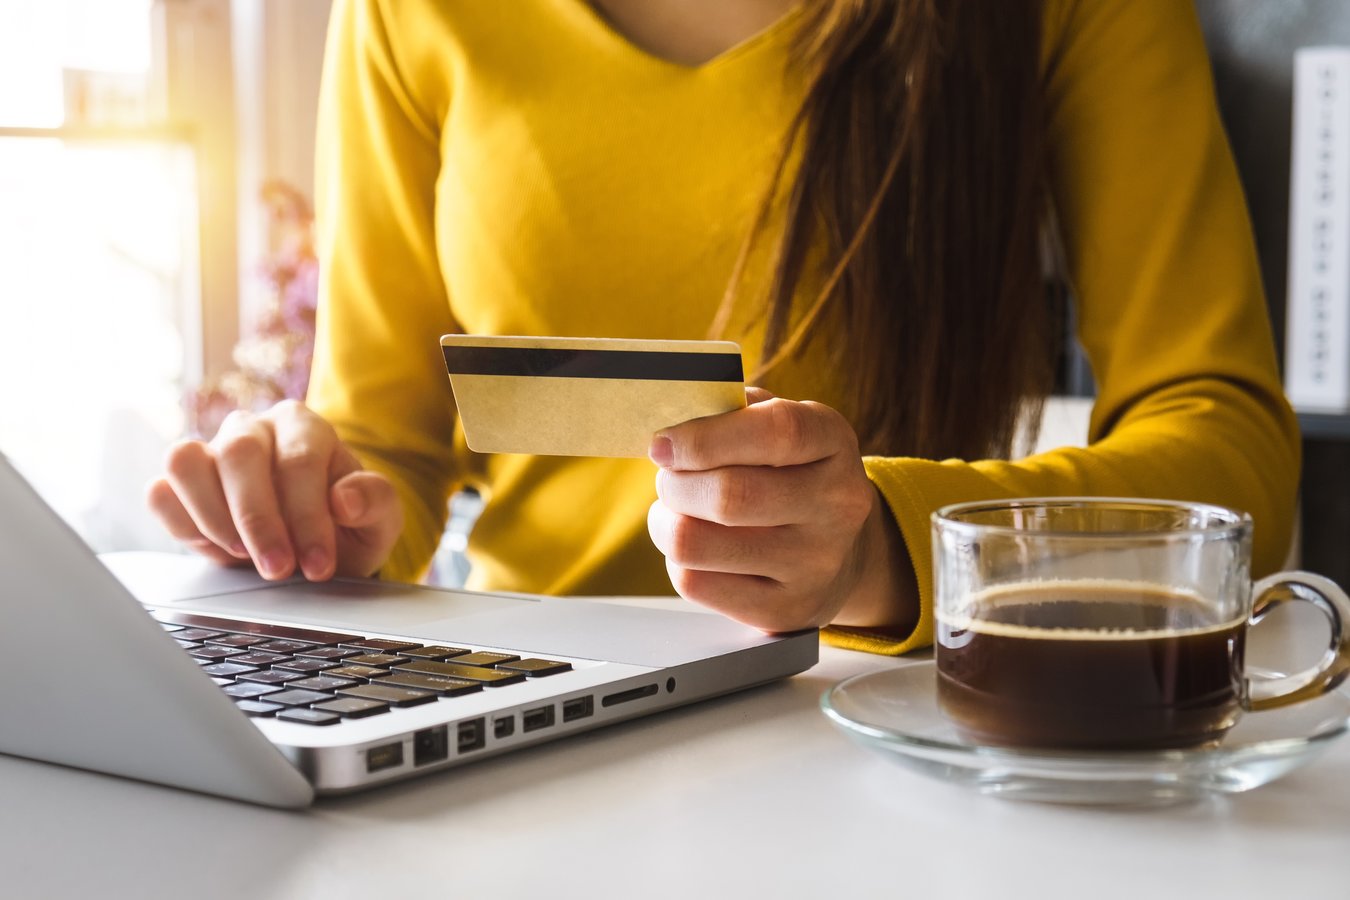 woman ordering online with a credit card and laptop